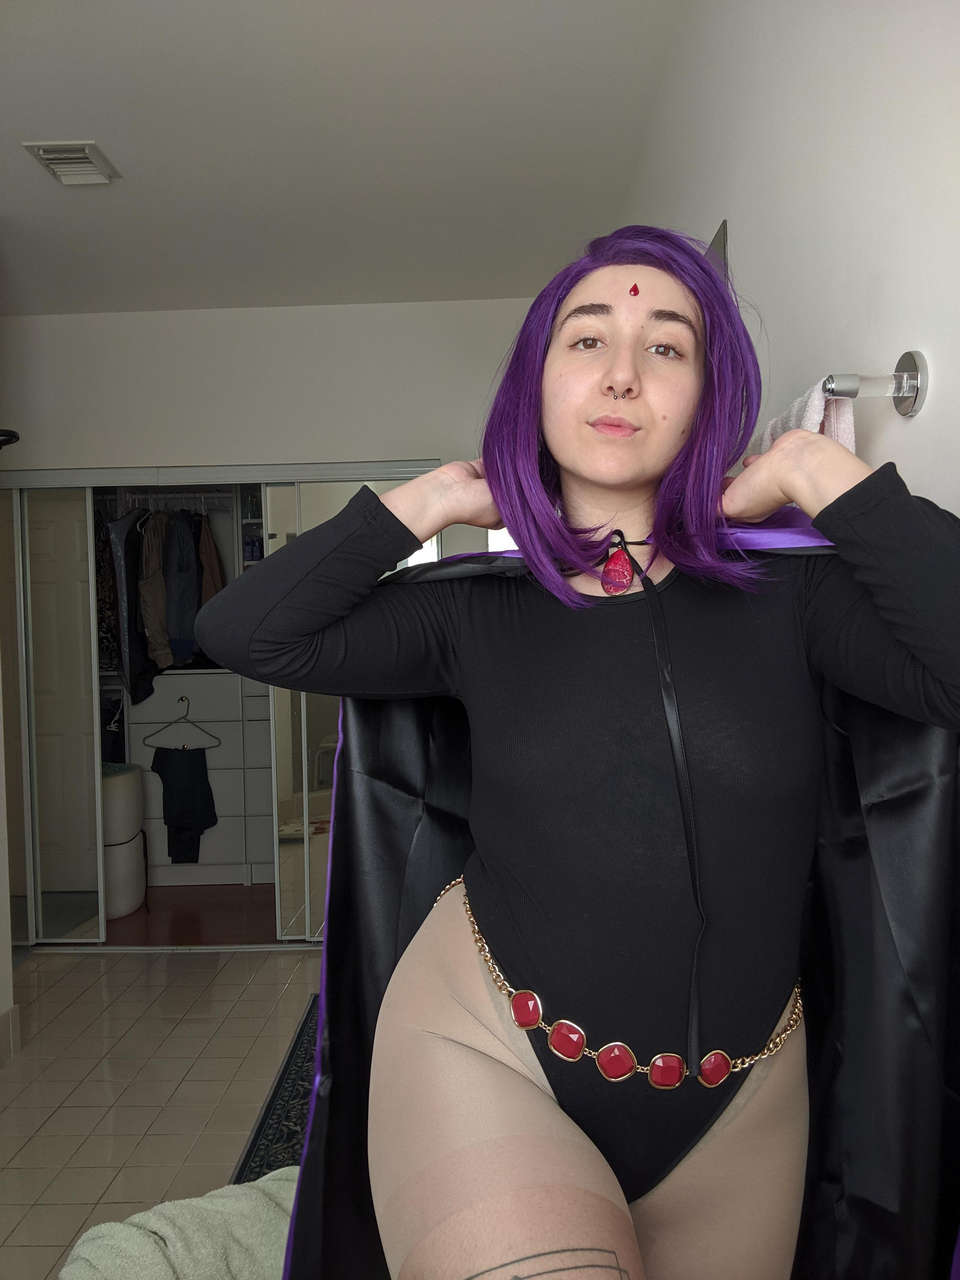 Valerie Im A South Florida Cosplayer Heres My Recent Raven Cosplay 